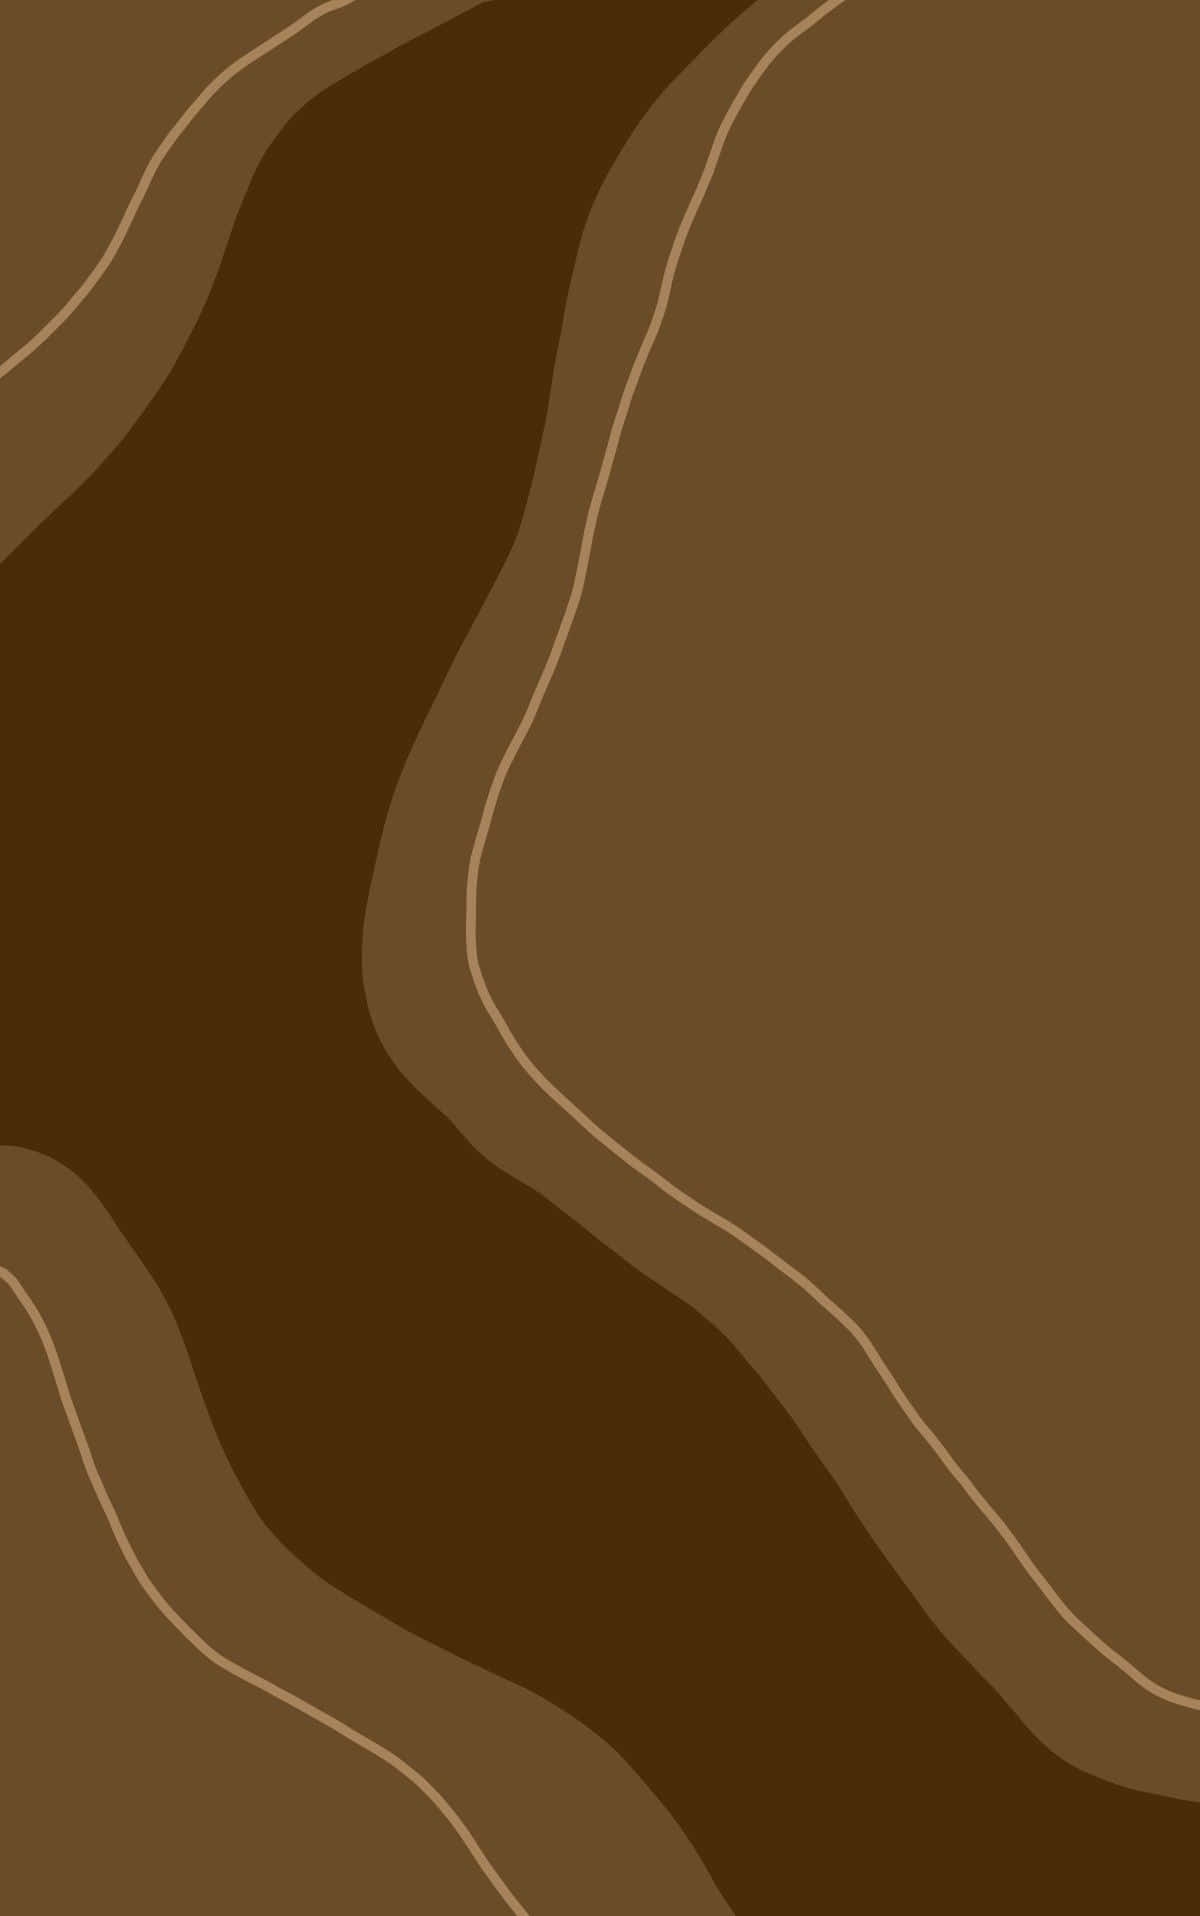 A Brown And White River With A Brown Background